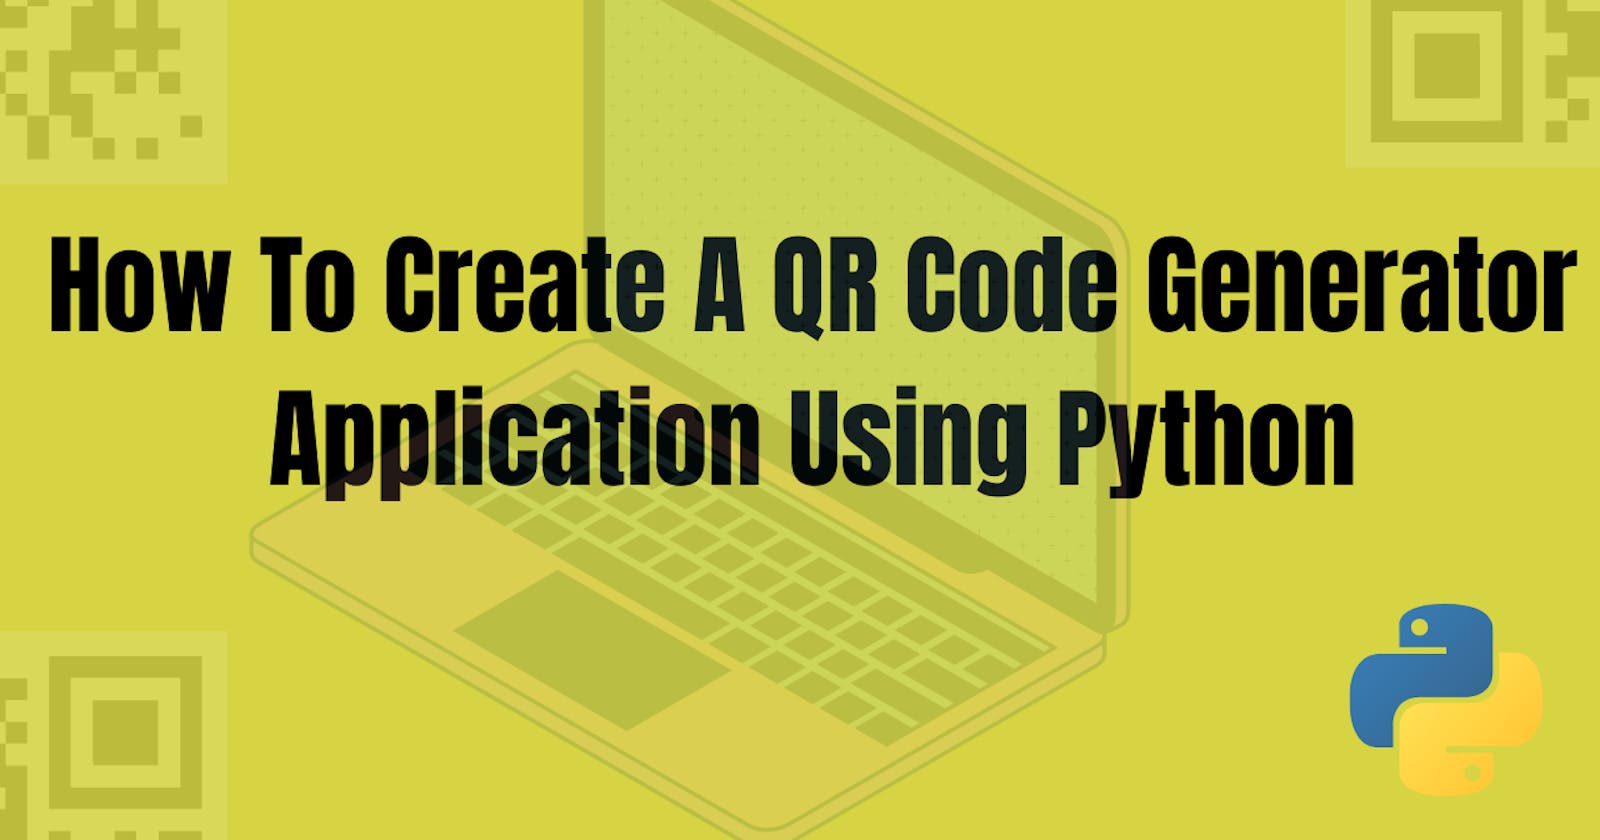 How to create a Customizable QR code generator using python